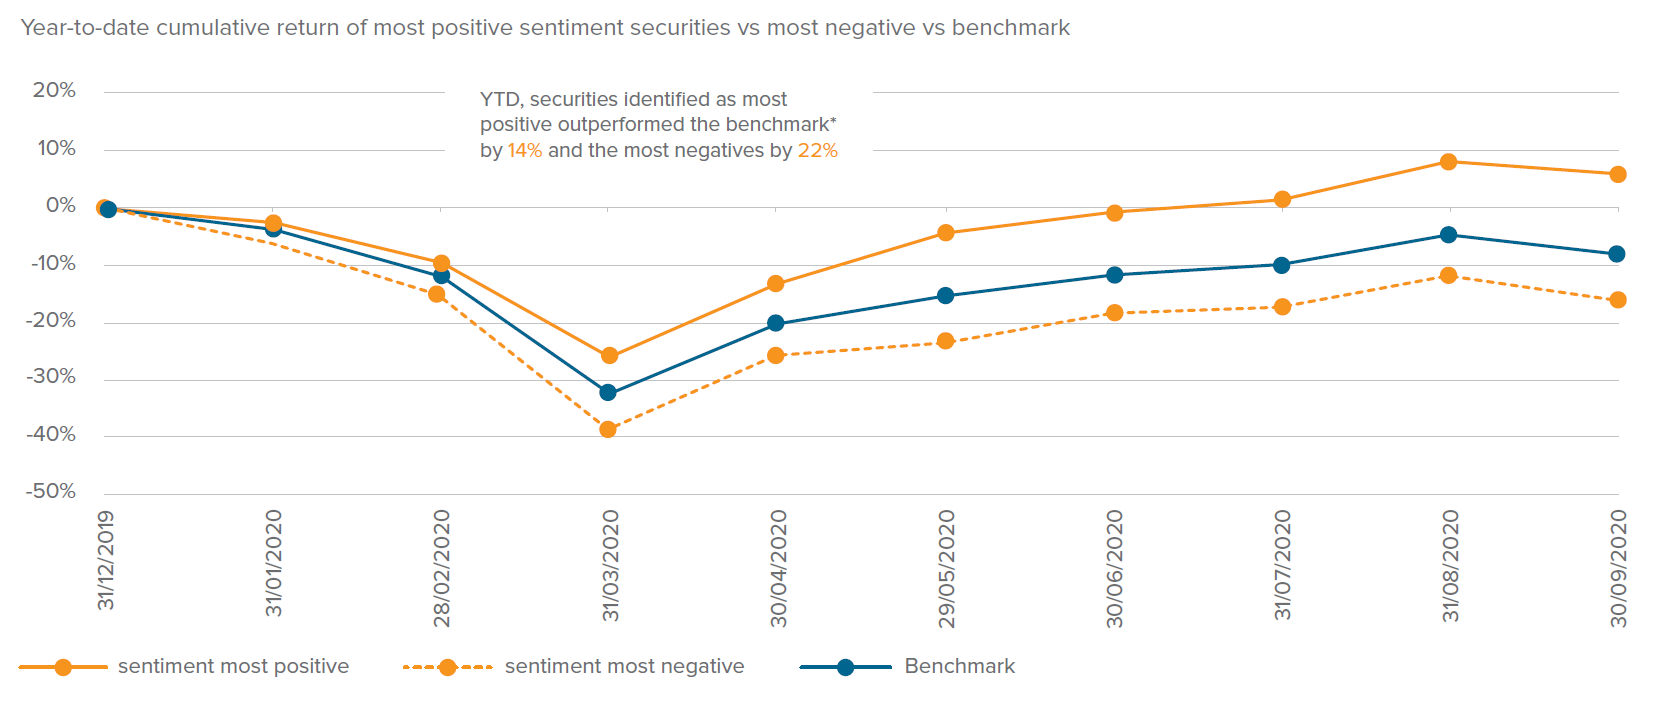 Year-to-date cumulative return of most positive sentiment securities vs most negative vs benchmark